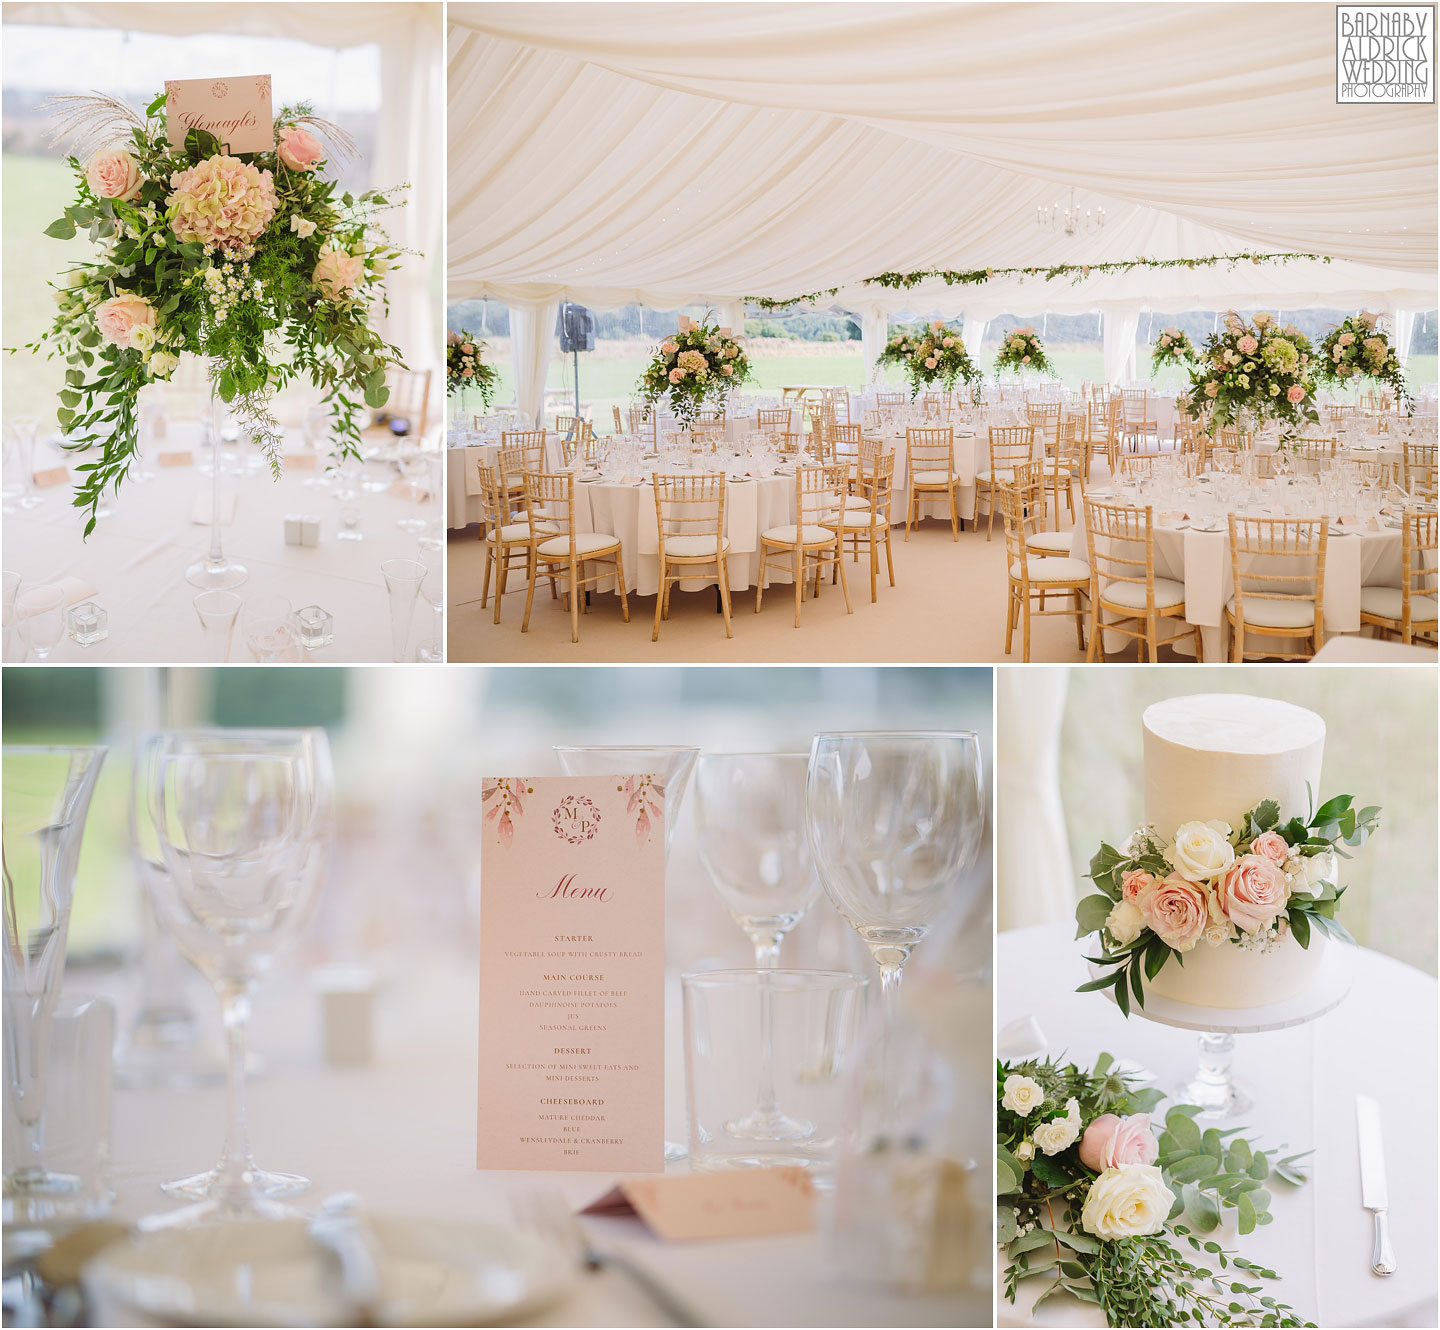 Yorkshire field Marquee Wedding, Field Marquee Wedding Photos, Yorkshire Marquee hire, Marquee wedding Photography, James Dabbs & Co Marquee Hire